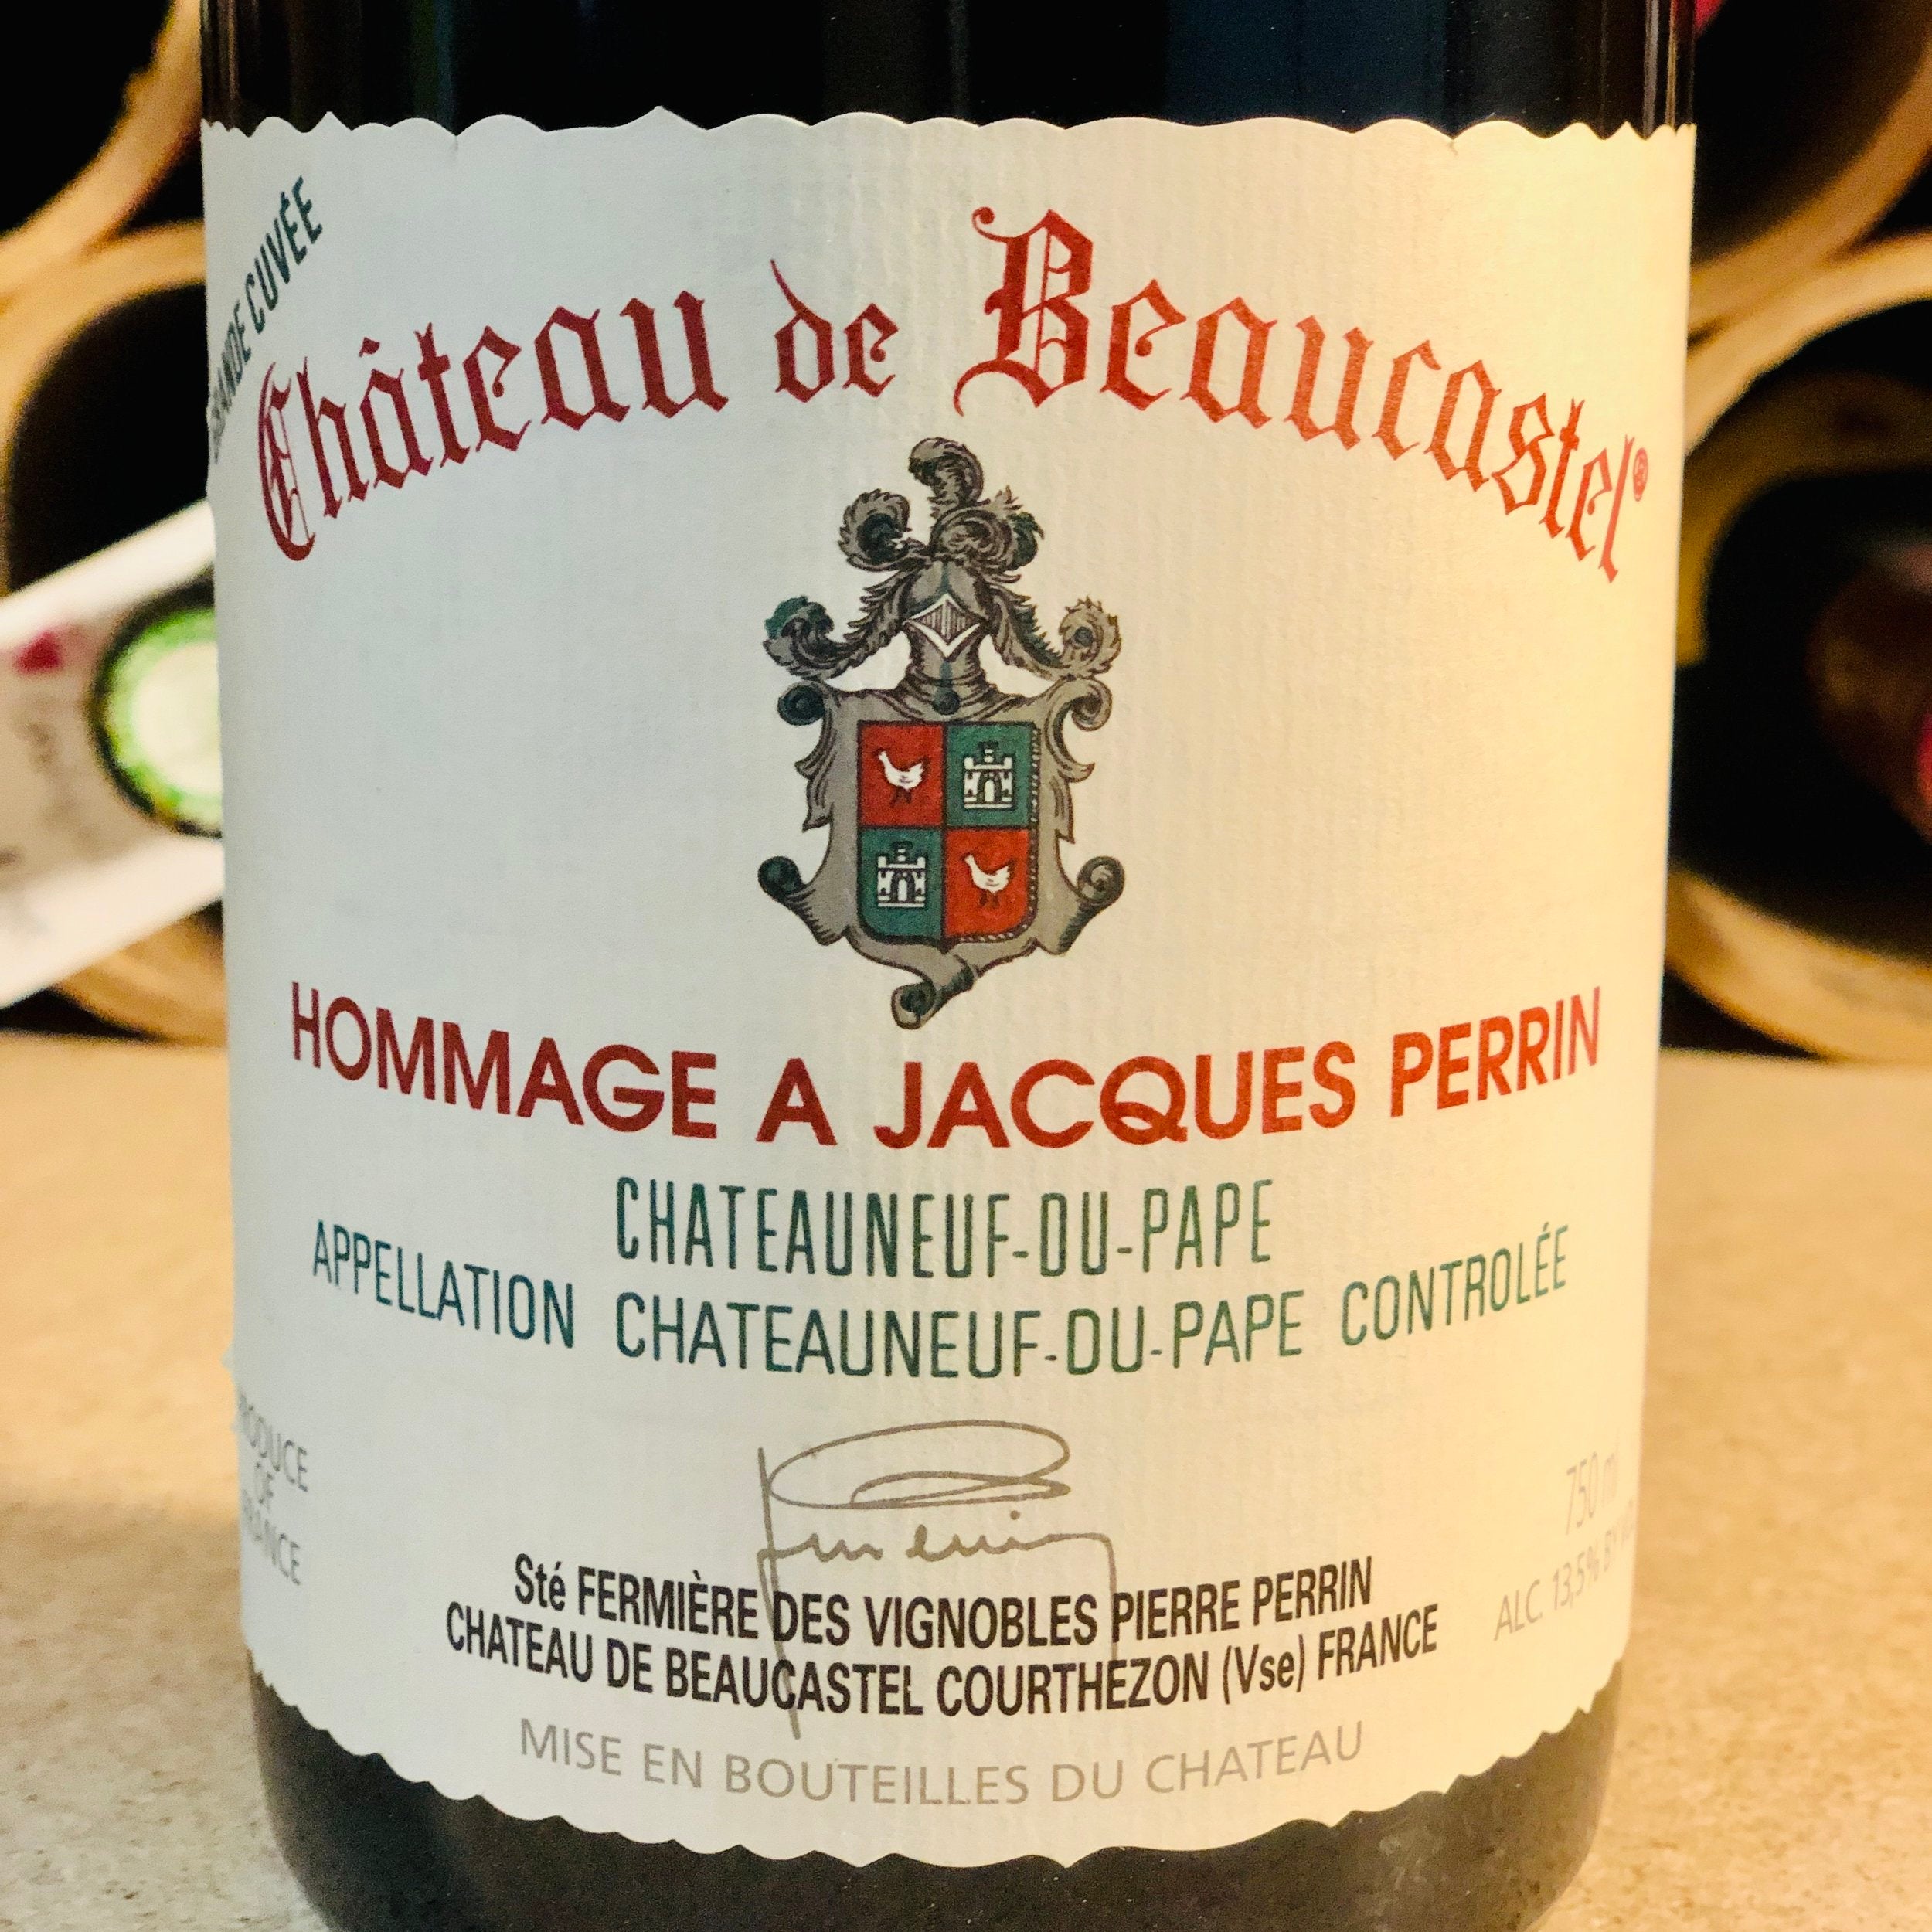 Beaucastel, Chateauneuf-du-Pape, Hommage a Jacques Perrin 2000